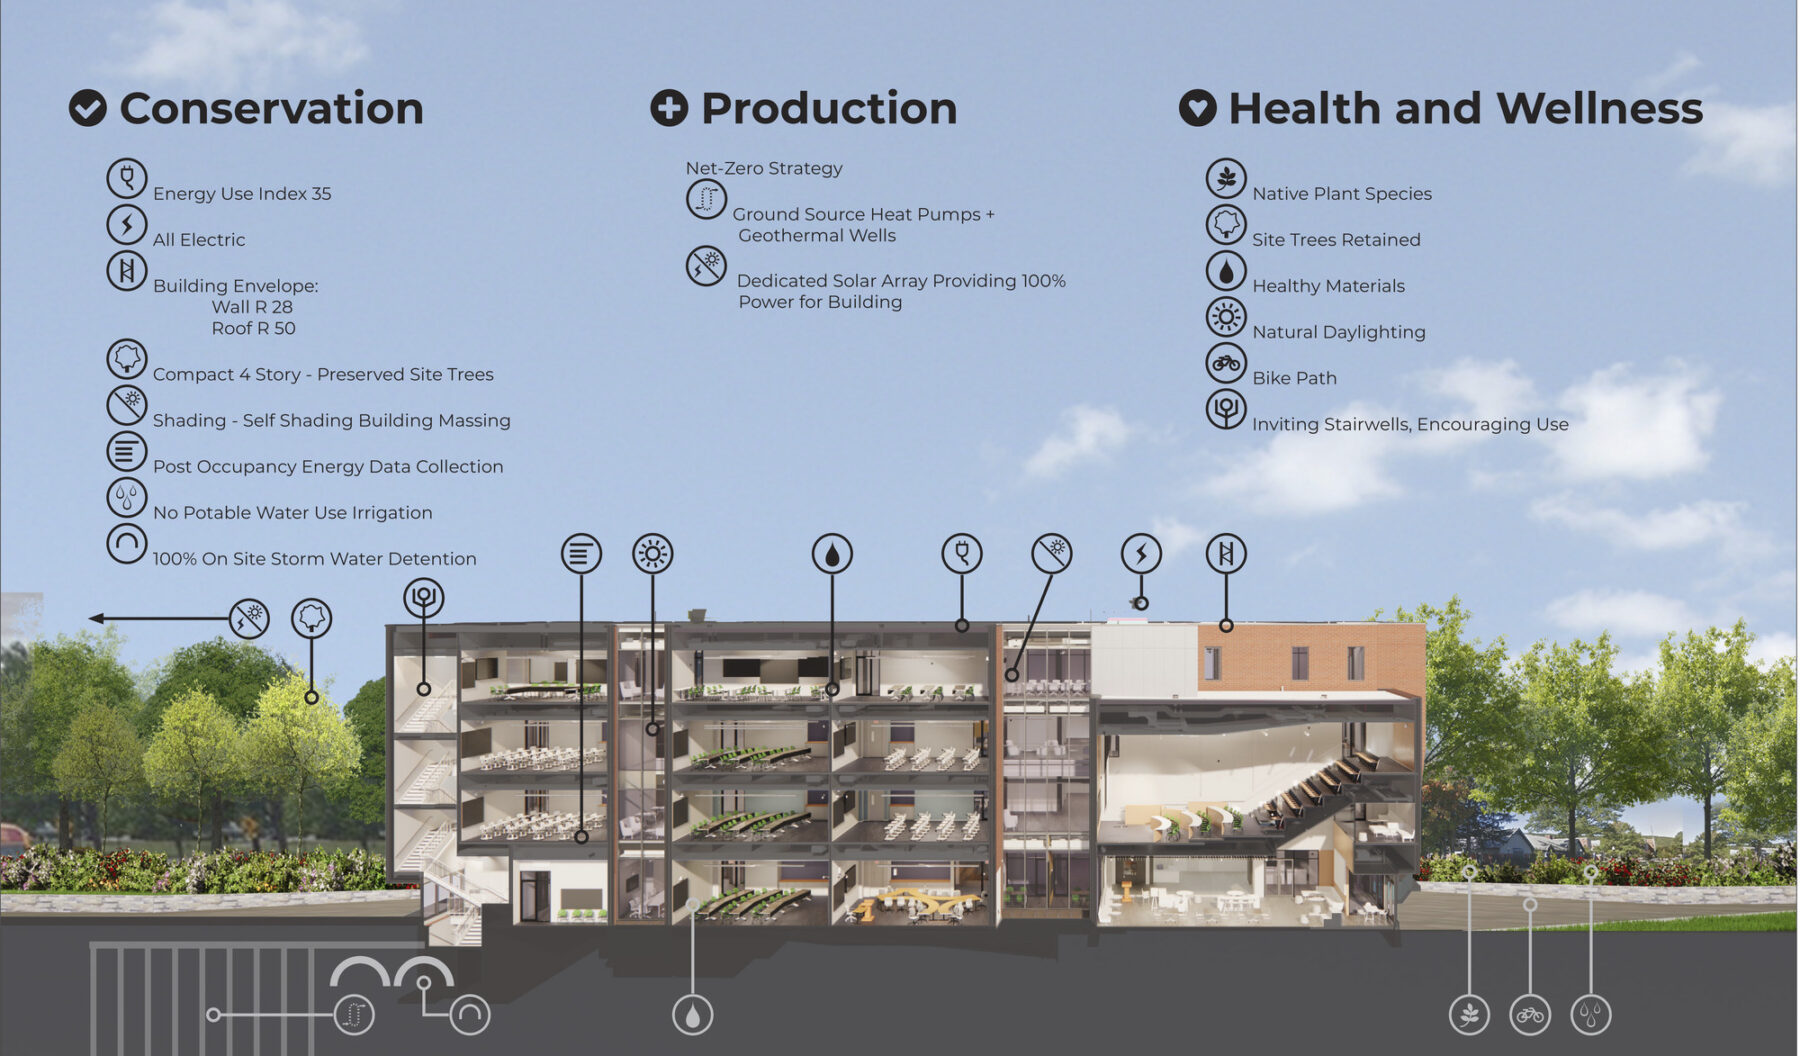 Sustainability diagram detailing conservation, production for net-zero strategy, and health and wellness